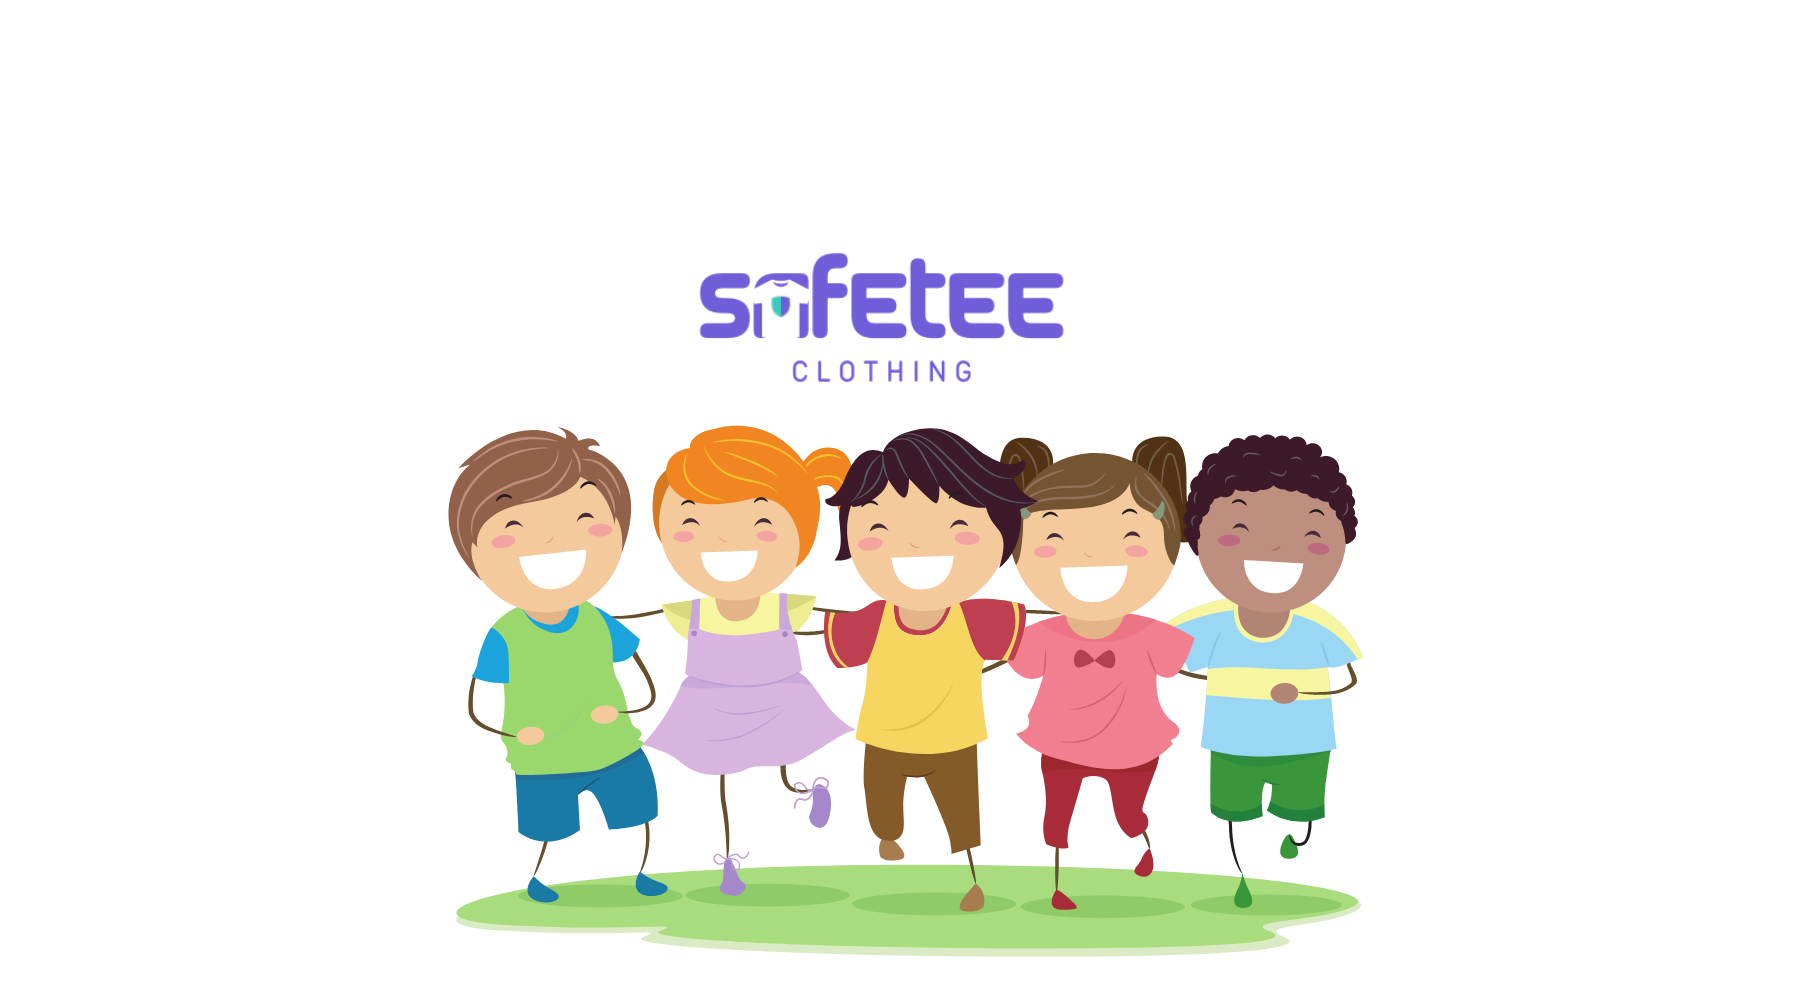 Welcome to Safetee Clothing!